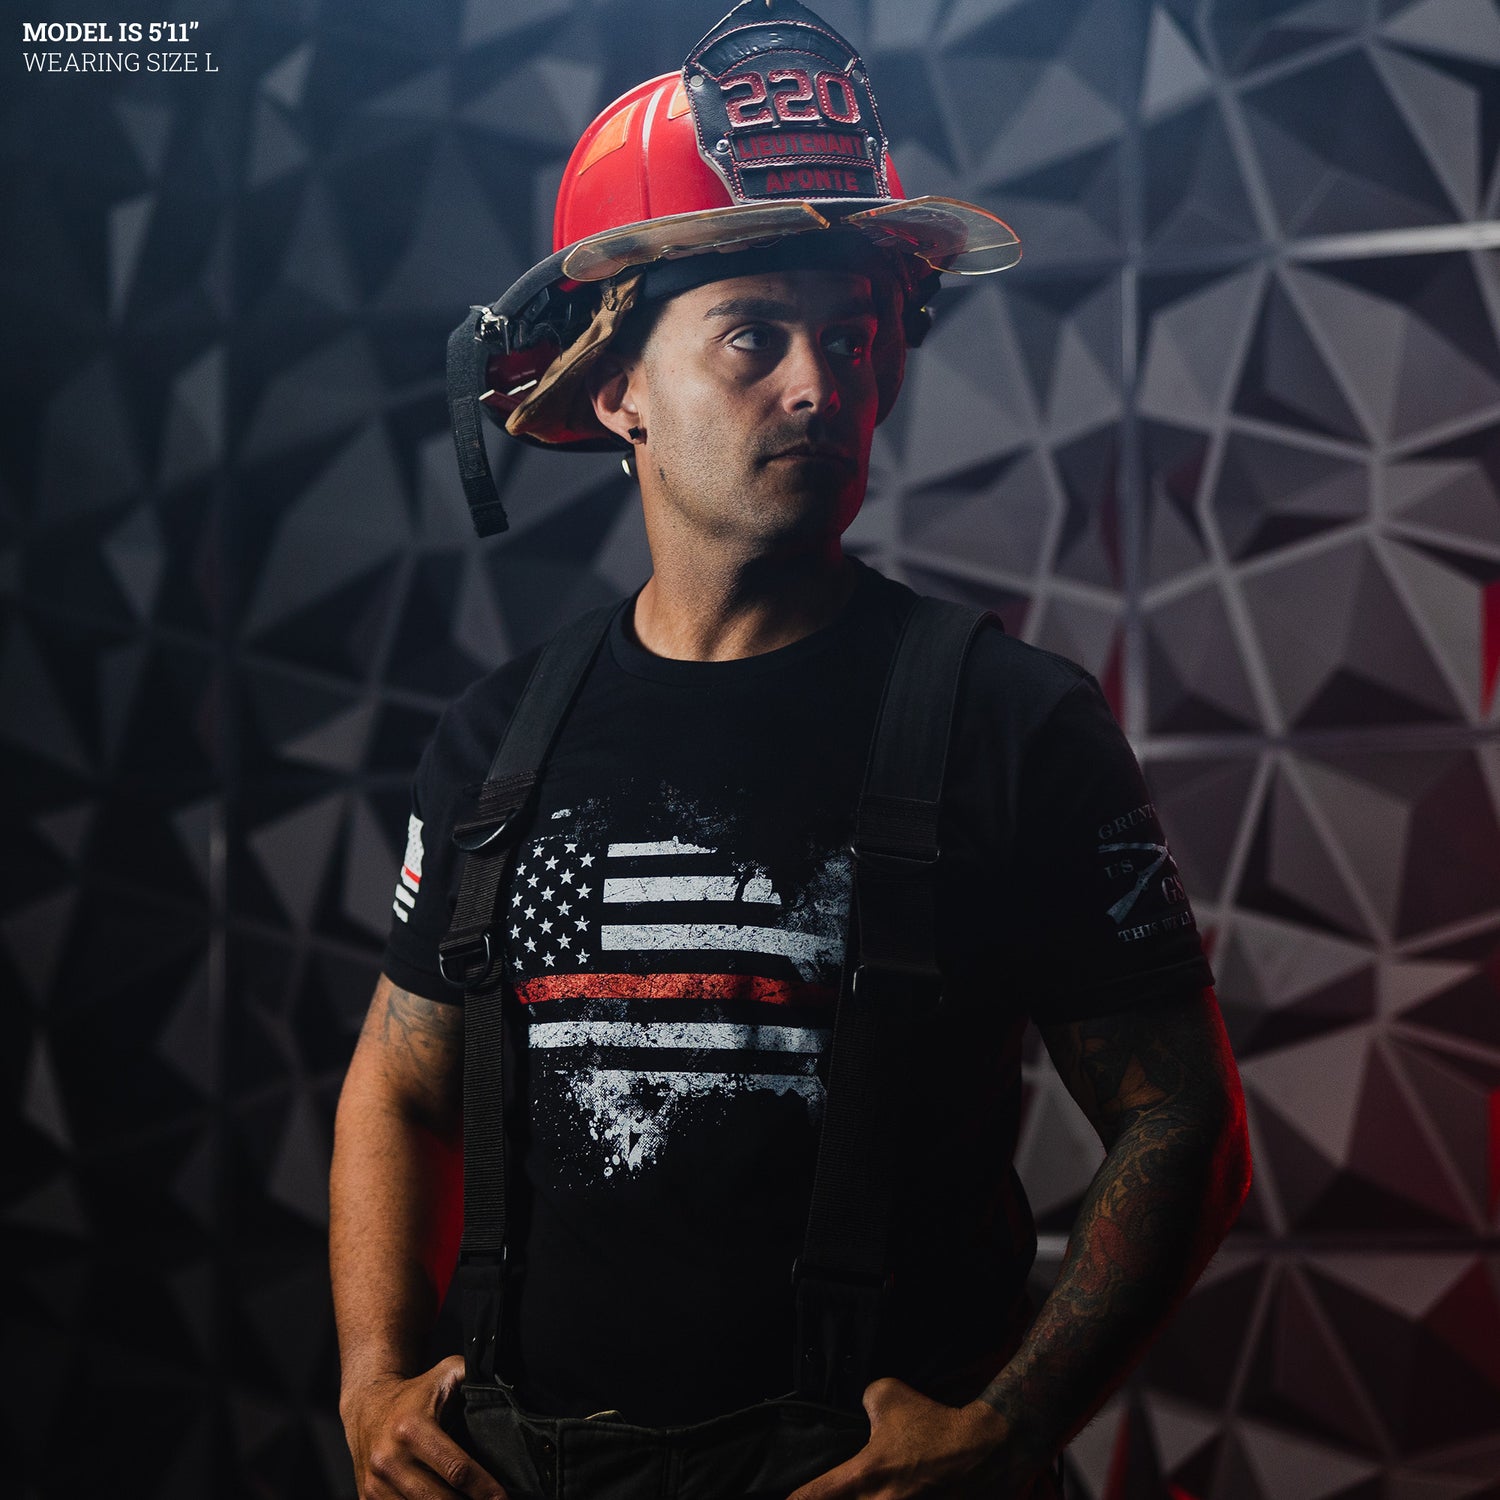 Firefighter T-Shirts Sizing 